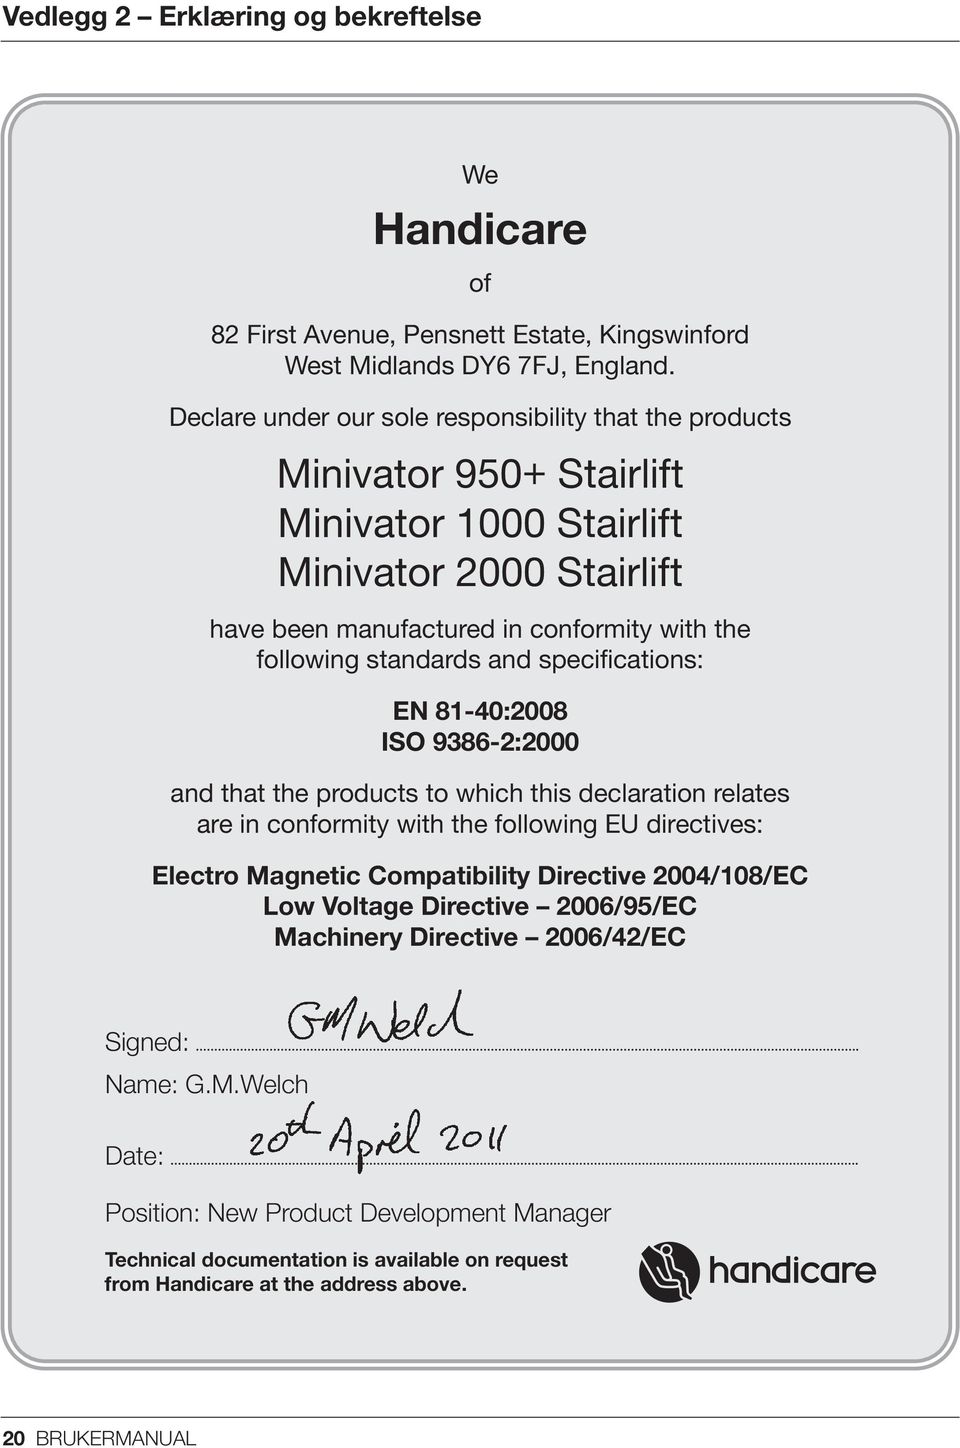 standards and specifications: EN 81-40:2008 ISO 9386-2:2000 and that the products to which this declaration relates are in conformity with the following EU directives: Electro Magnetic